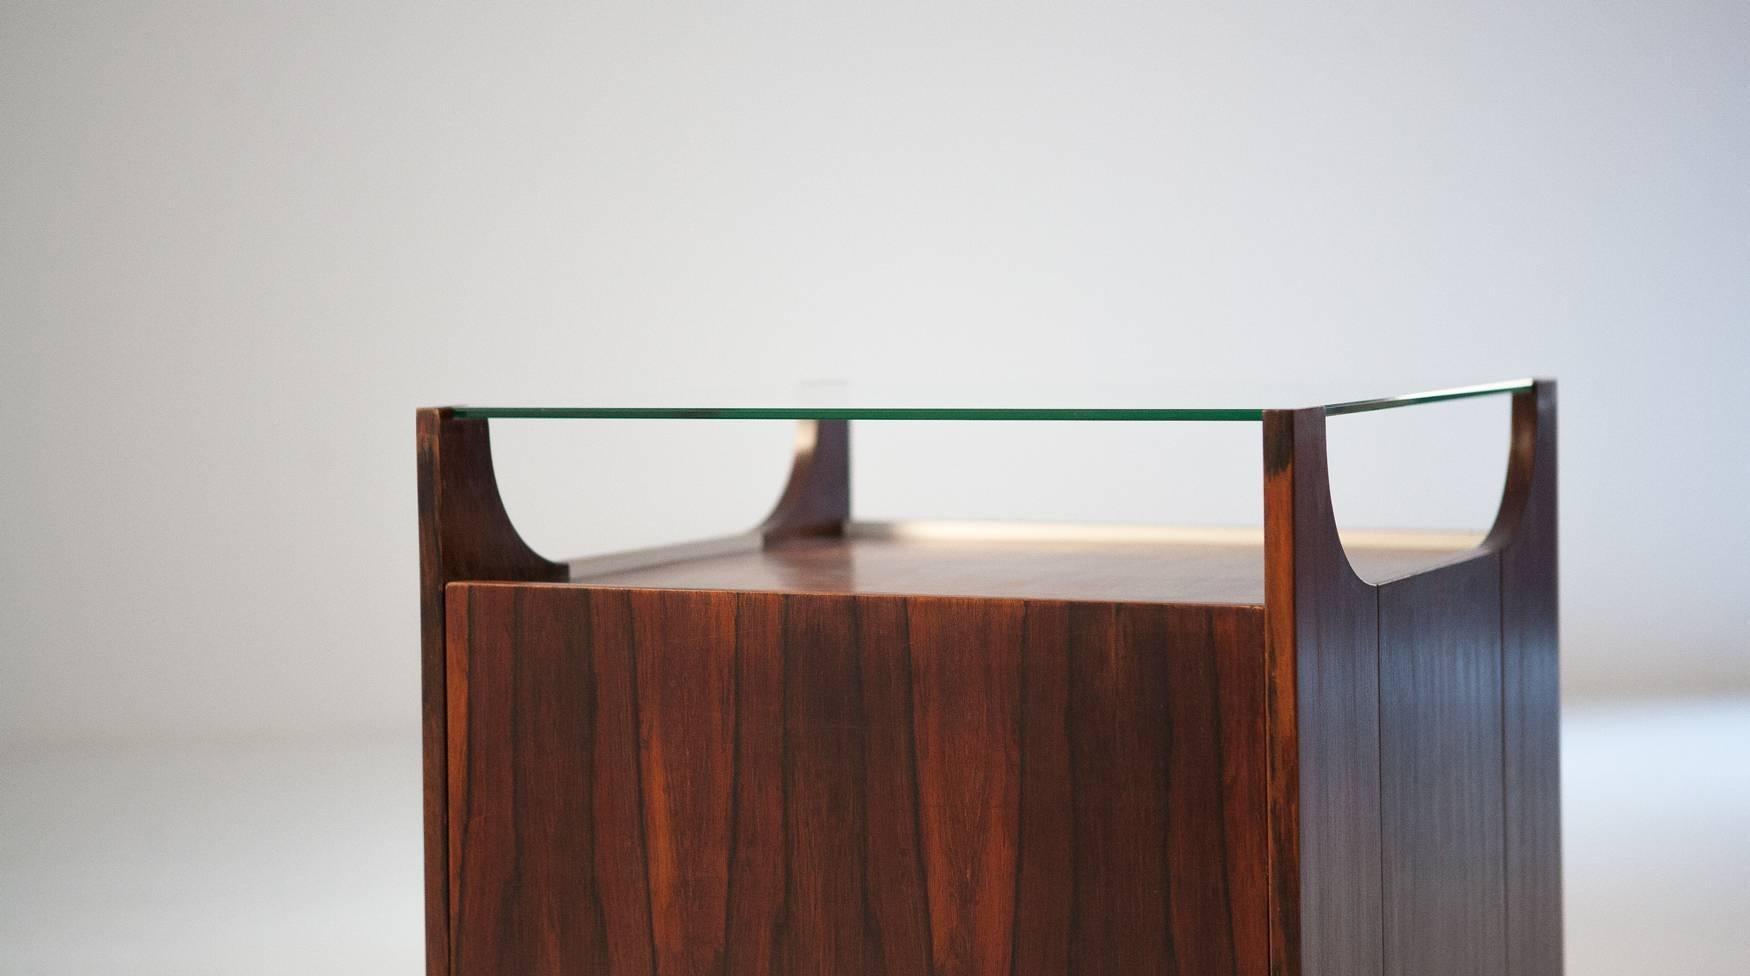 Table bar called ''cubobar'' designed by Bruno Munari in 1962 for Stildomus.
This is a rare first version in rosewood where the later editions was only Lacquered.
The piece is fully restored.